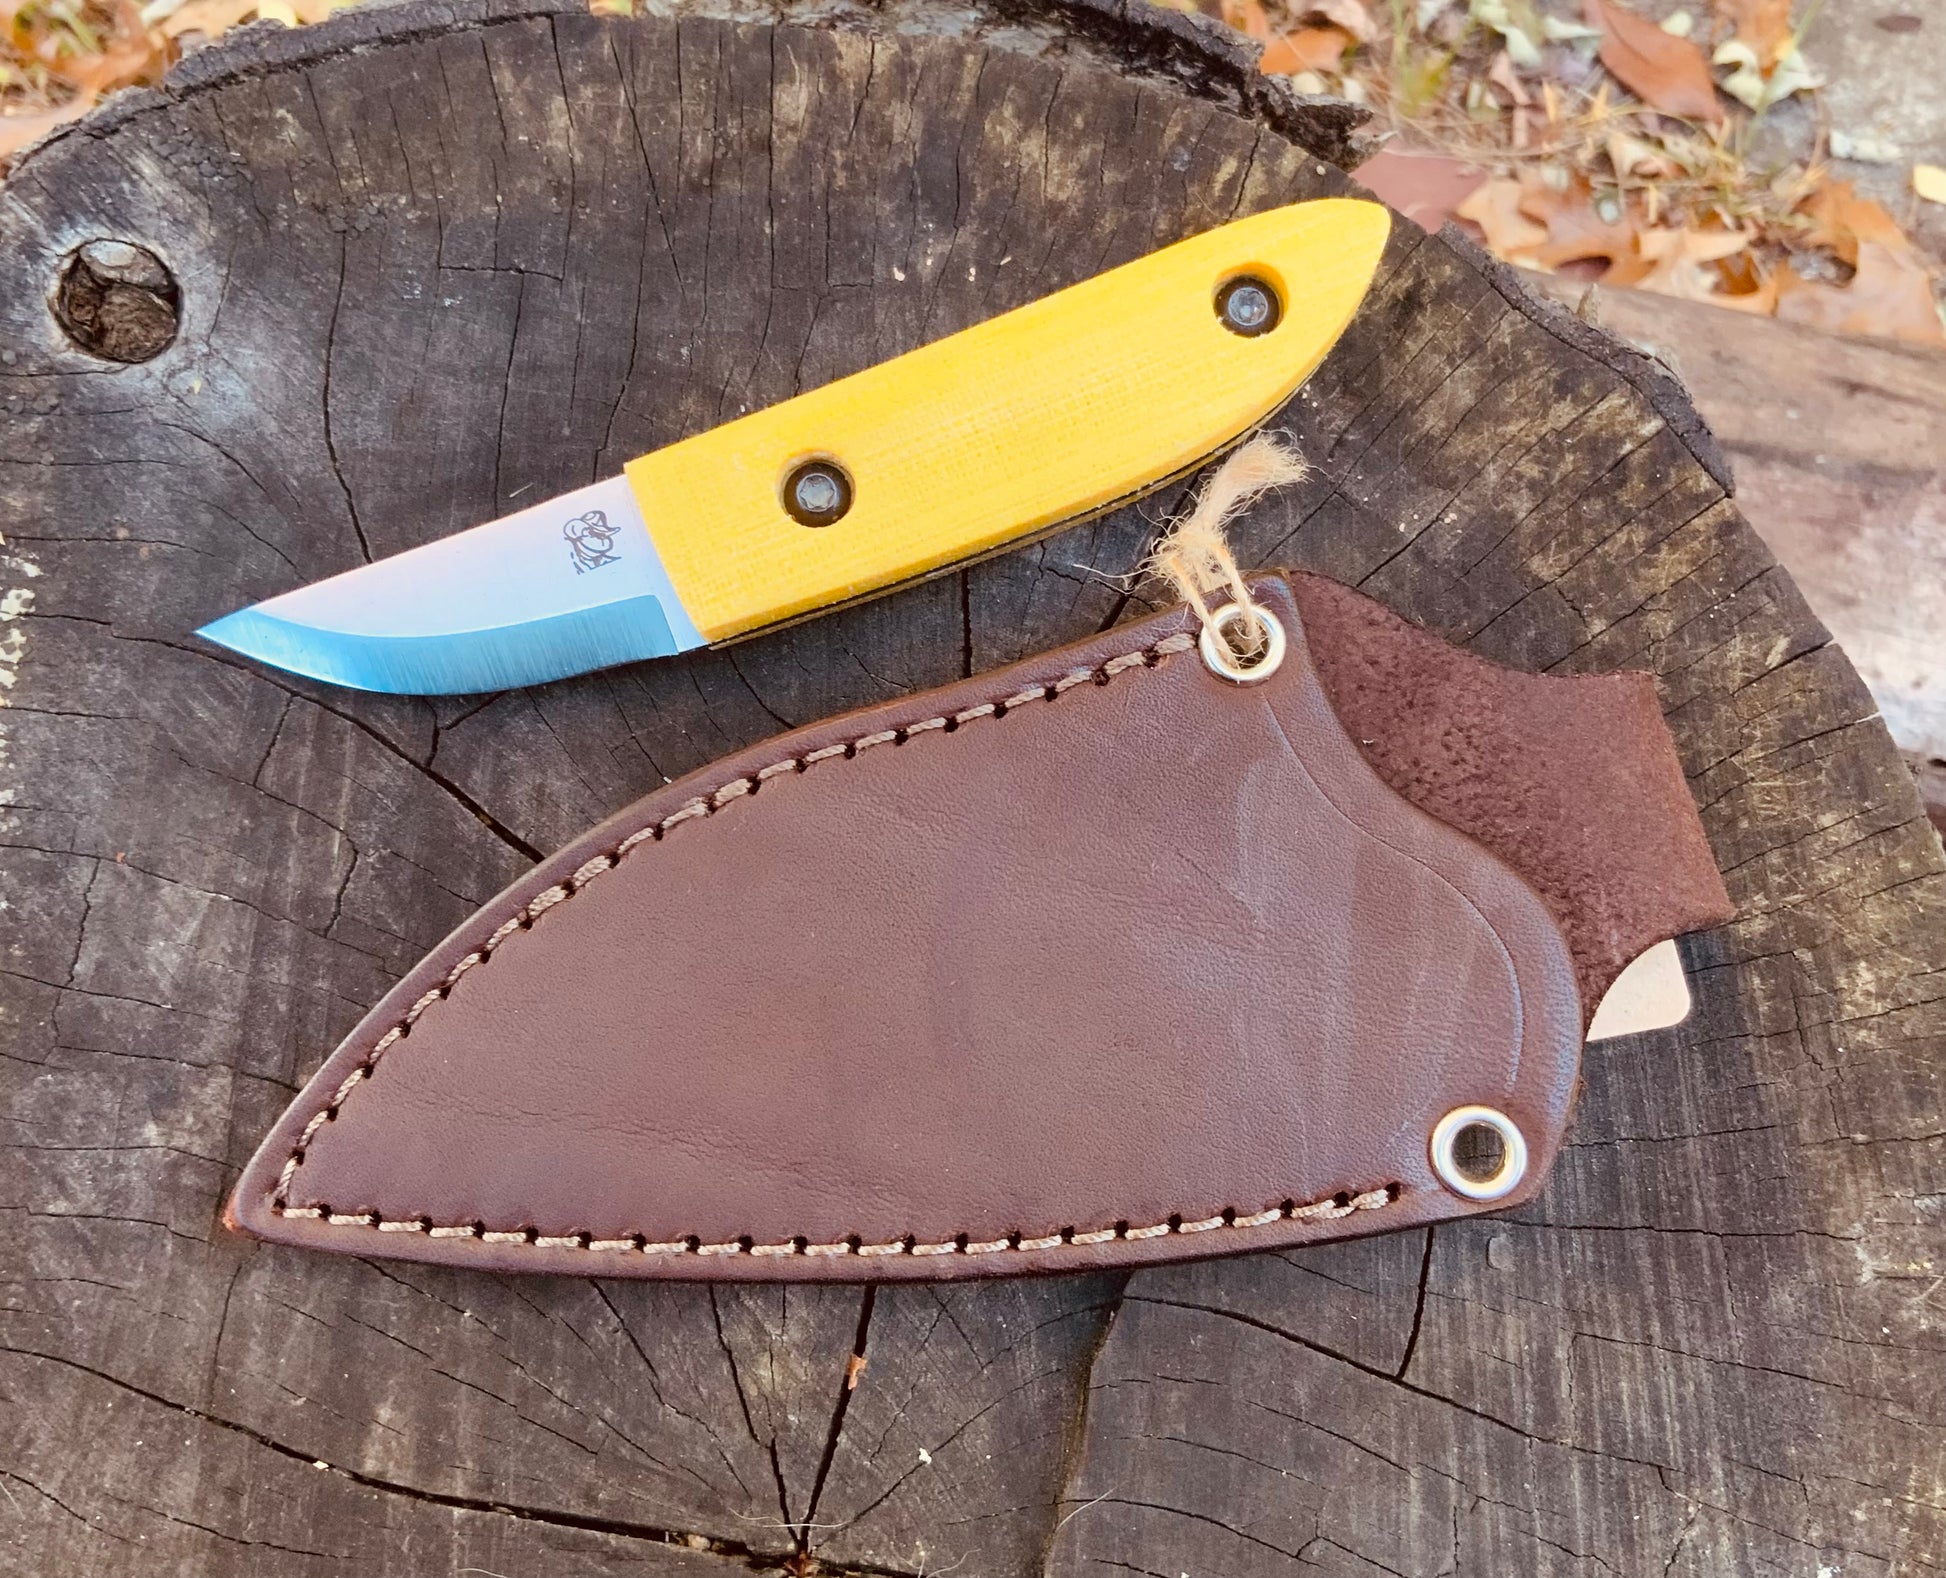 Kerf Carver Knife with Yellow Terotuf scales and leather JRE sheath from Woods Monkey